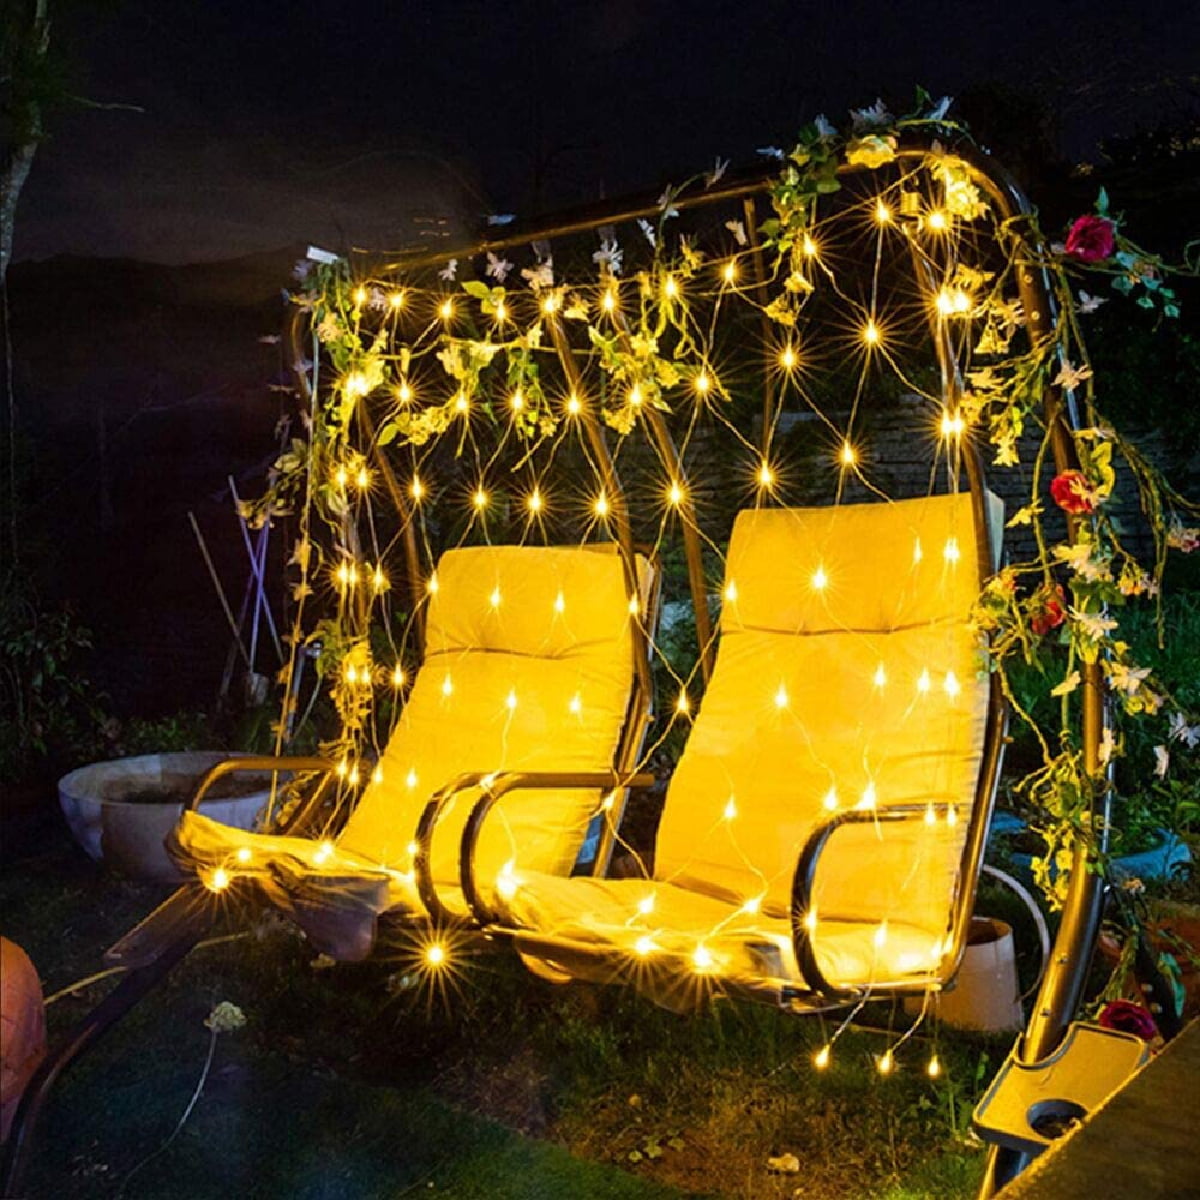 DC12V 5M 300LED String Fairy Lights Party Xmas Garden Outdoor Lighting Rope Deco 